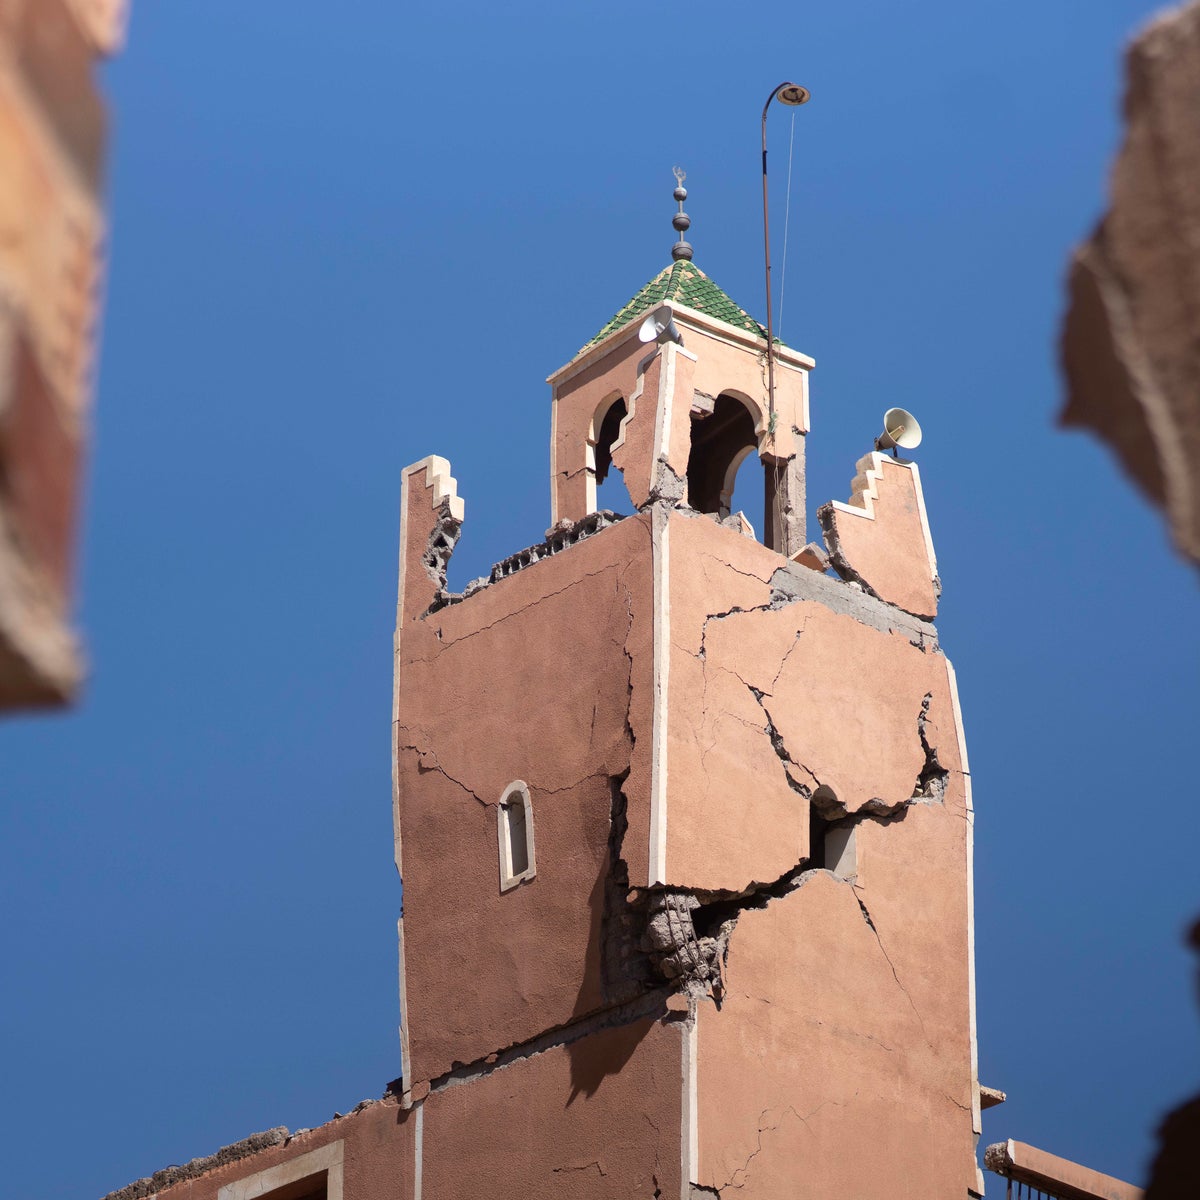 Morocco earthquake: A look at the deadliest quakes over the past 25 years | The Independent